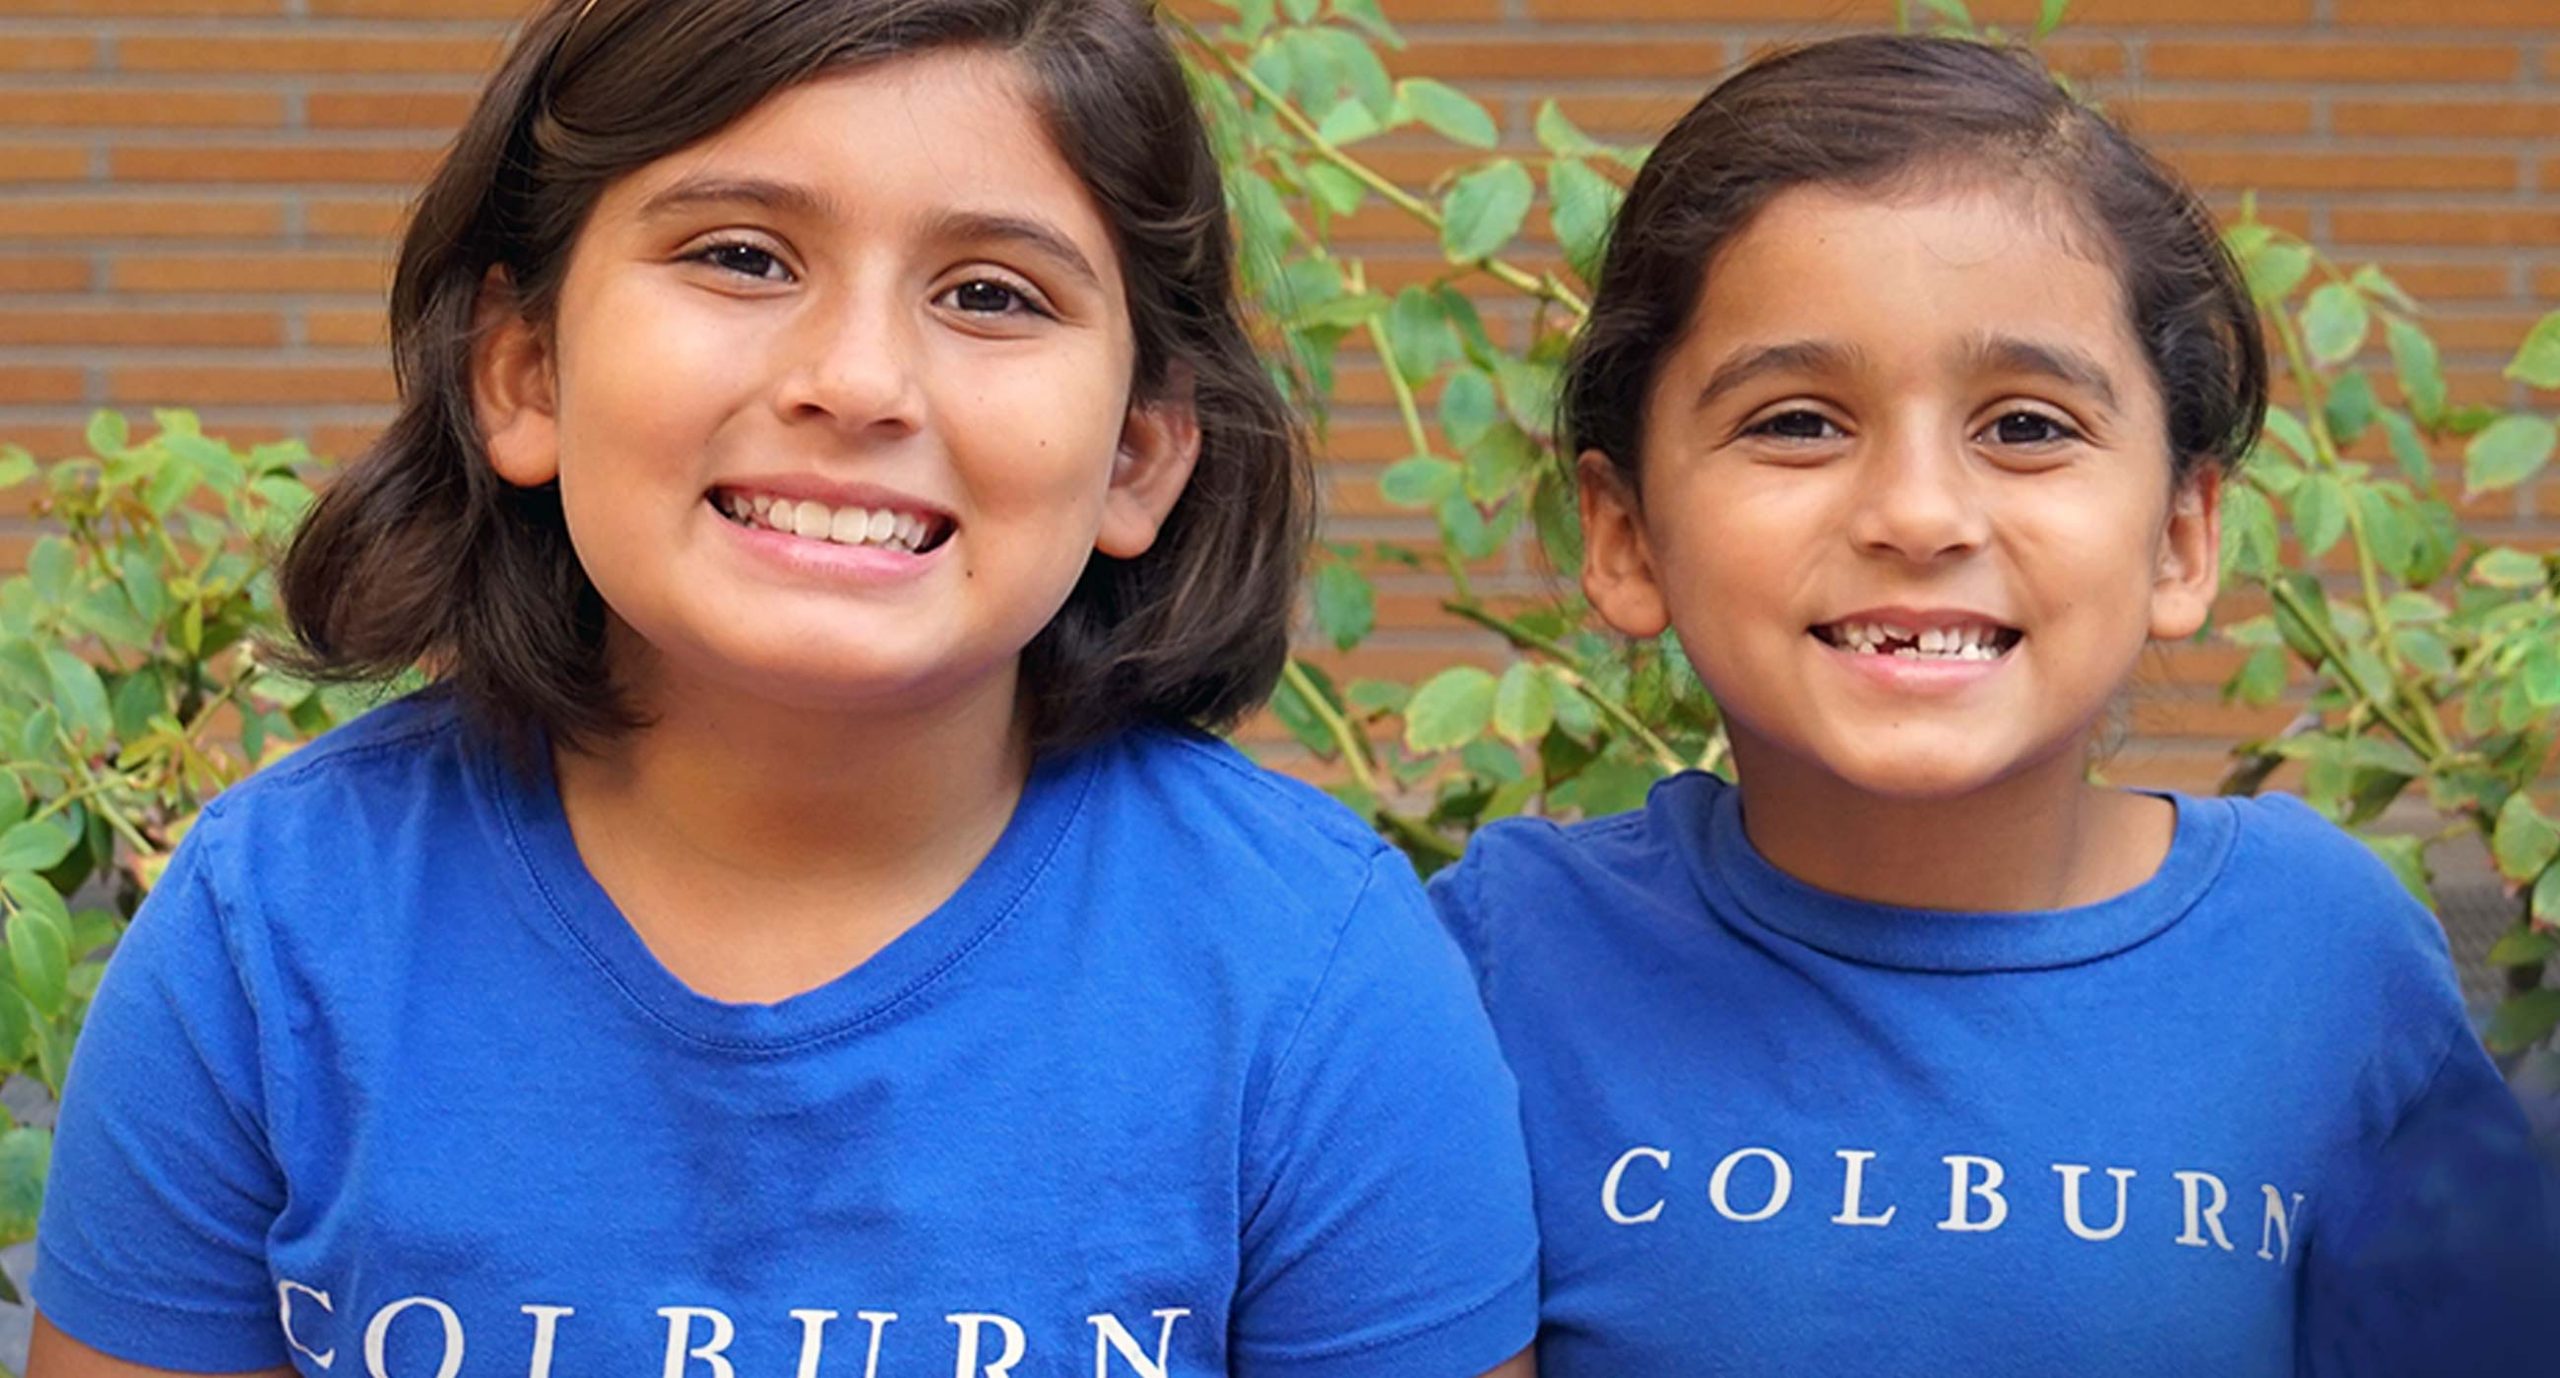 Two young students wearing blue Colburn tshirts smiling